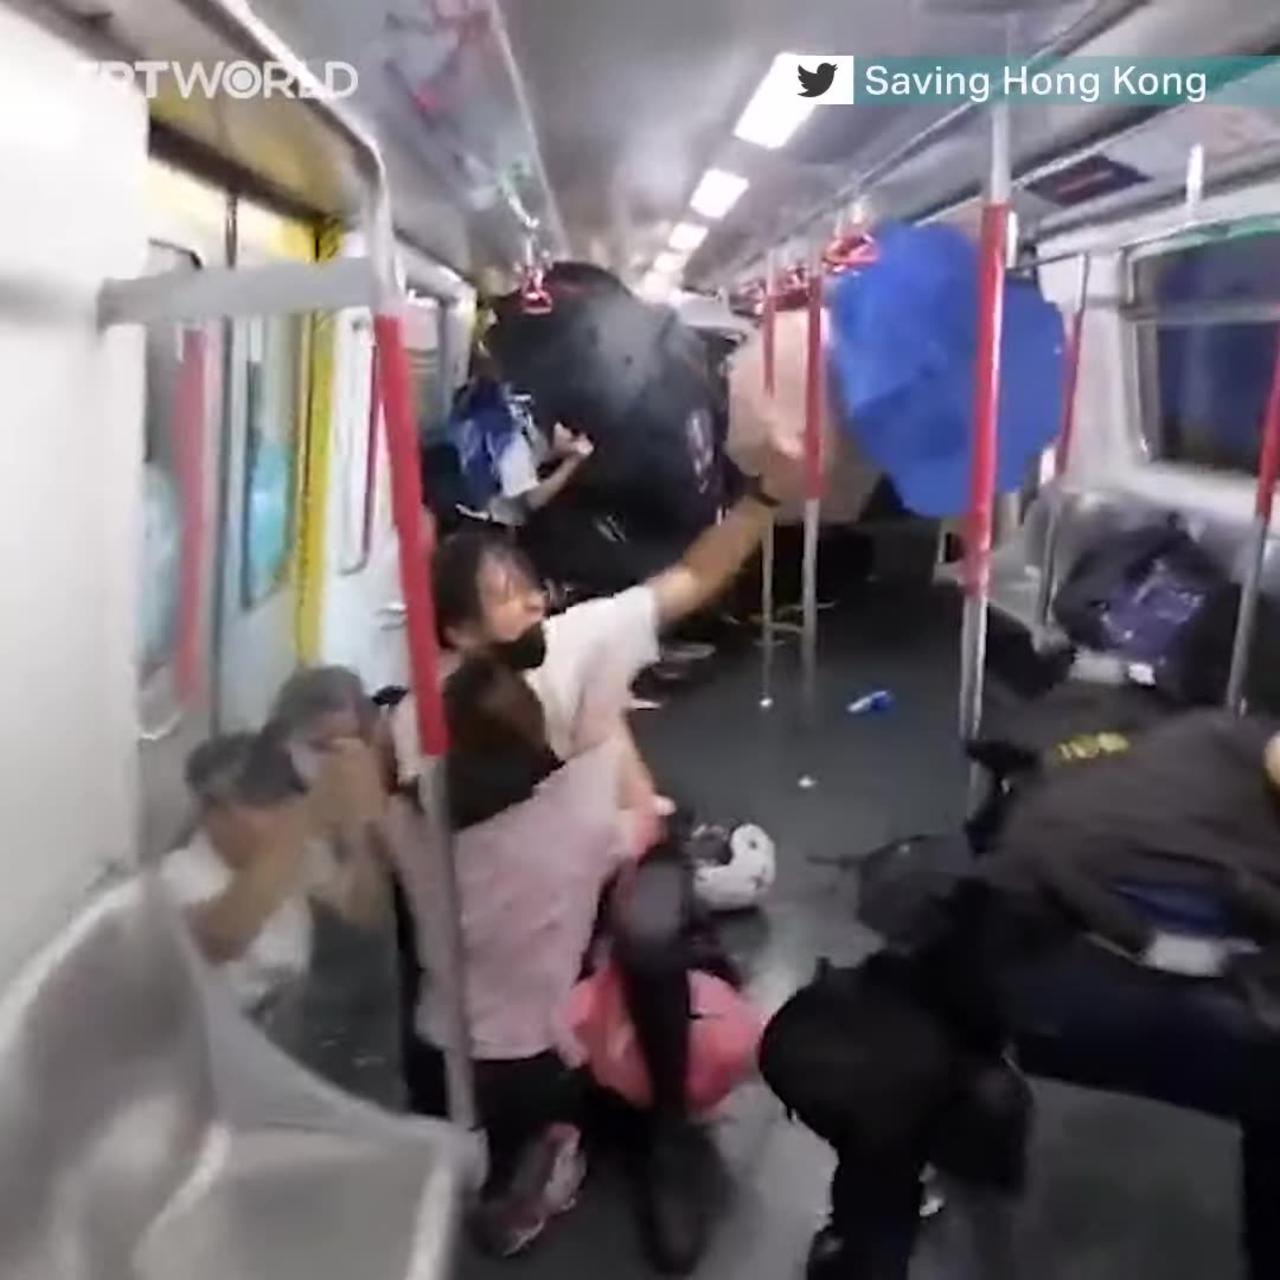 Police in Hong Kong beat up protesters on train